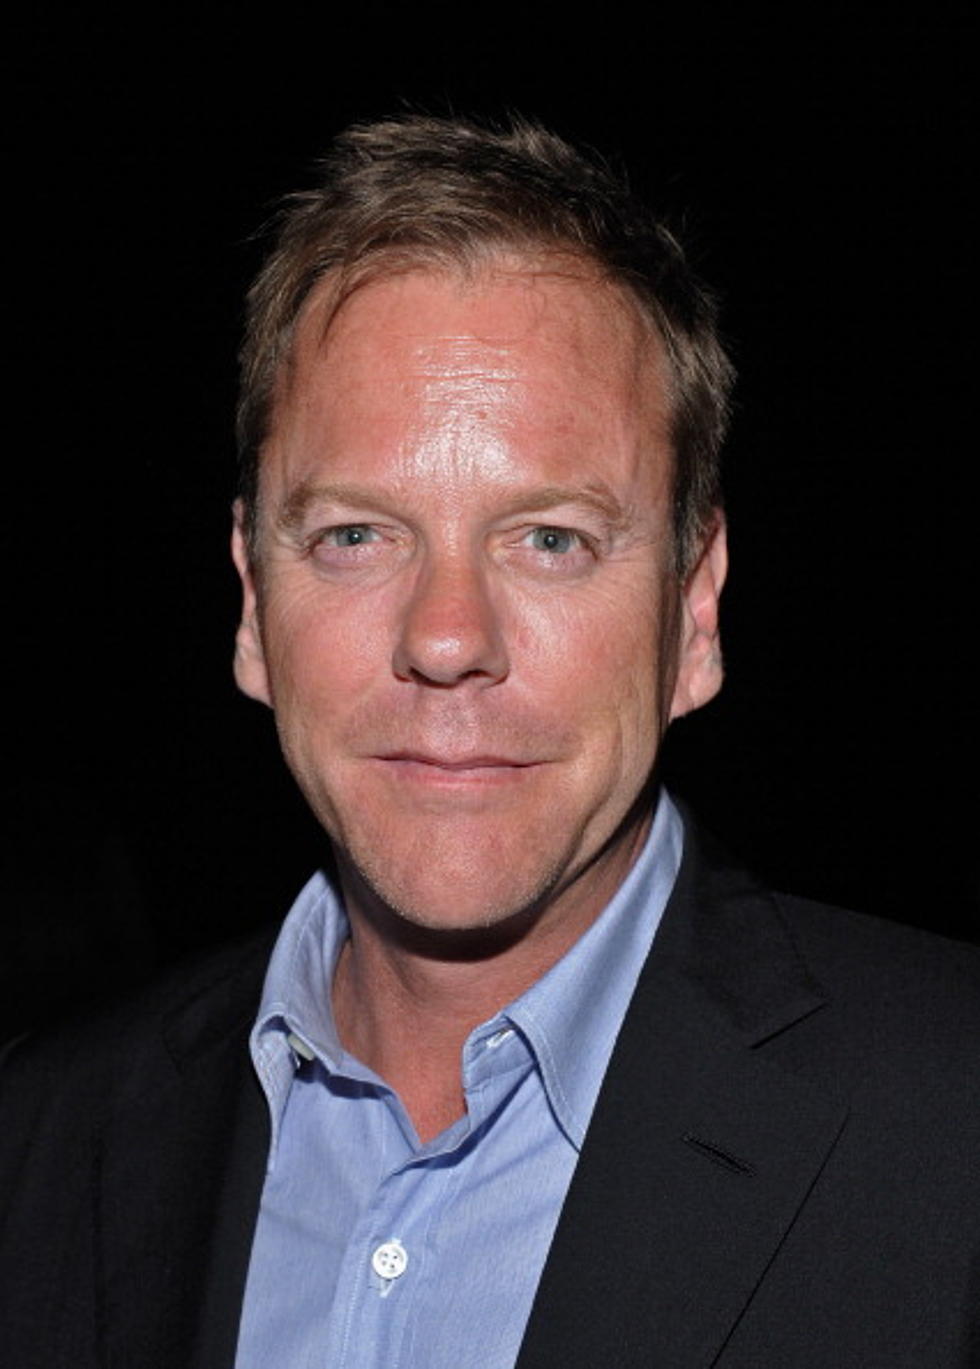 “The Simpsons” premieres with Kiefer Sutherland